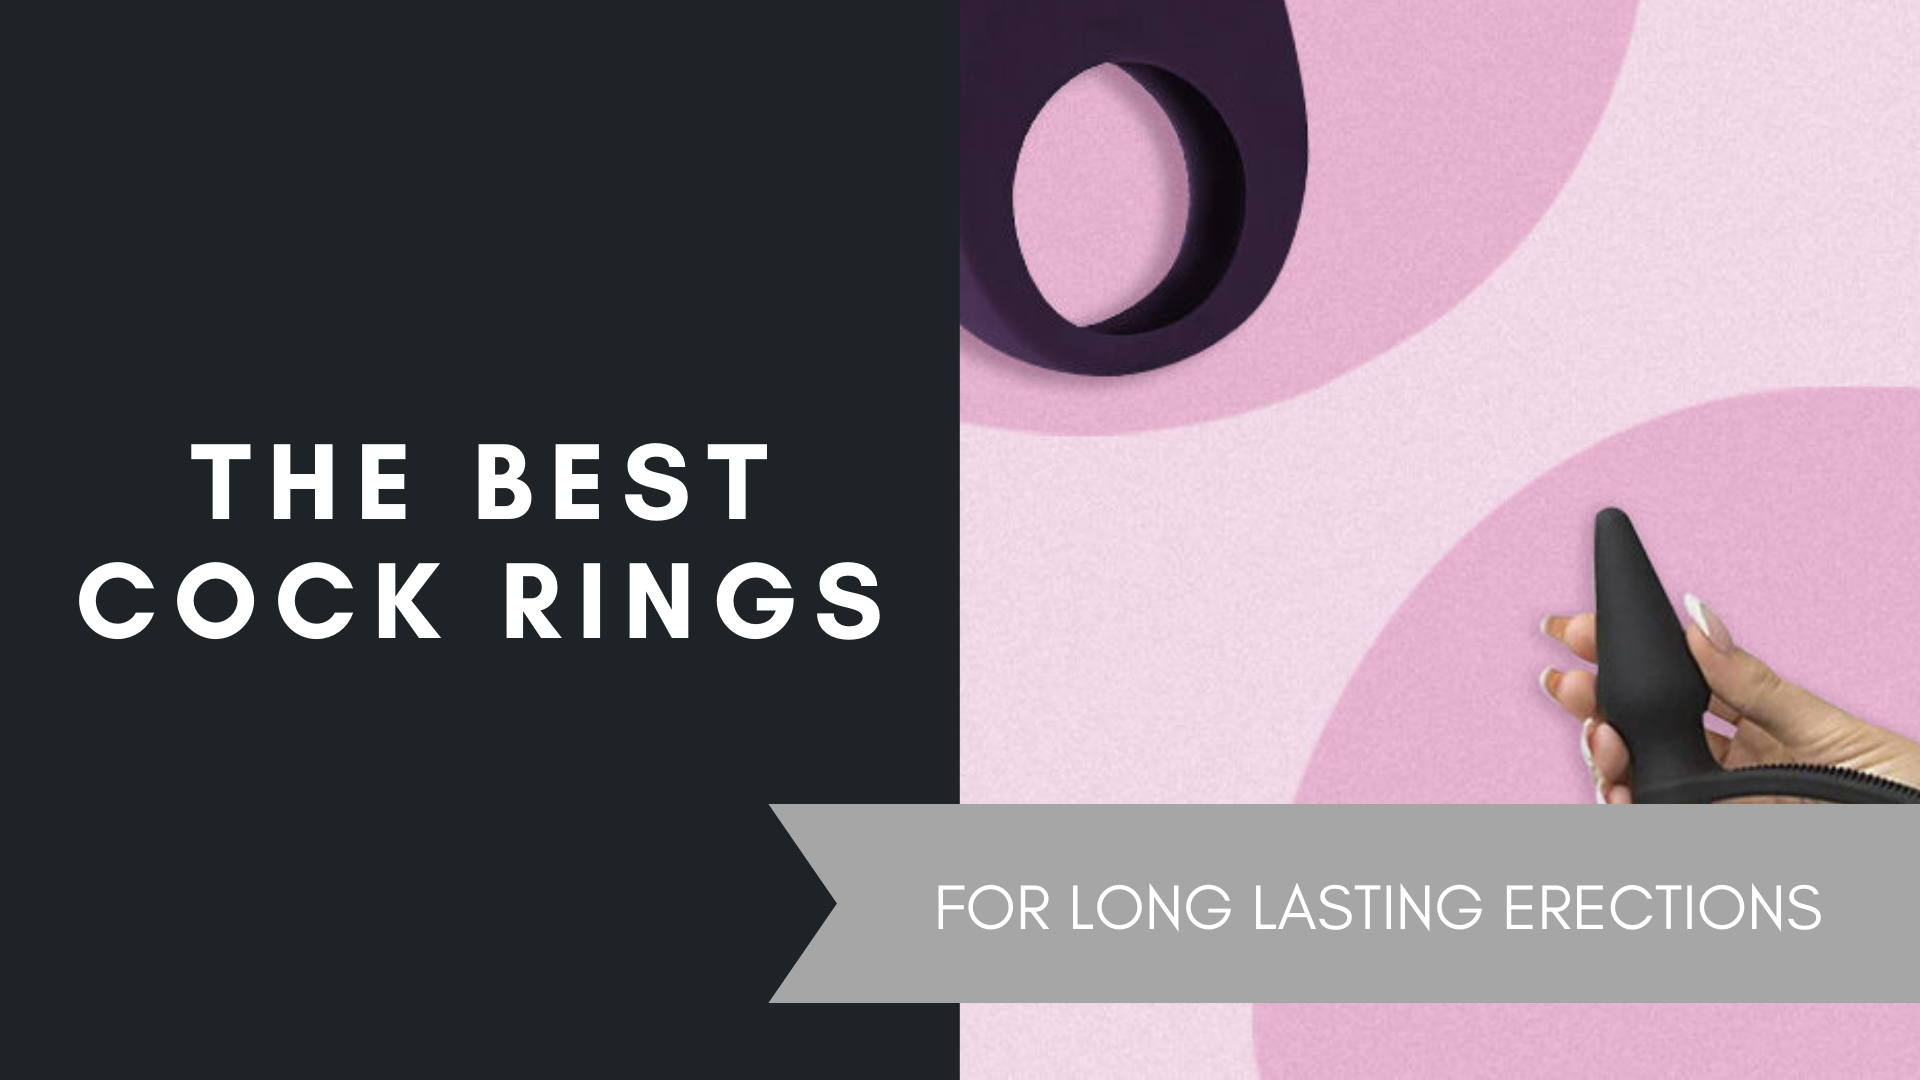 The Best Cock Rings